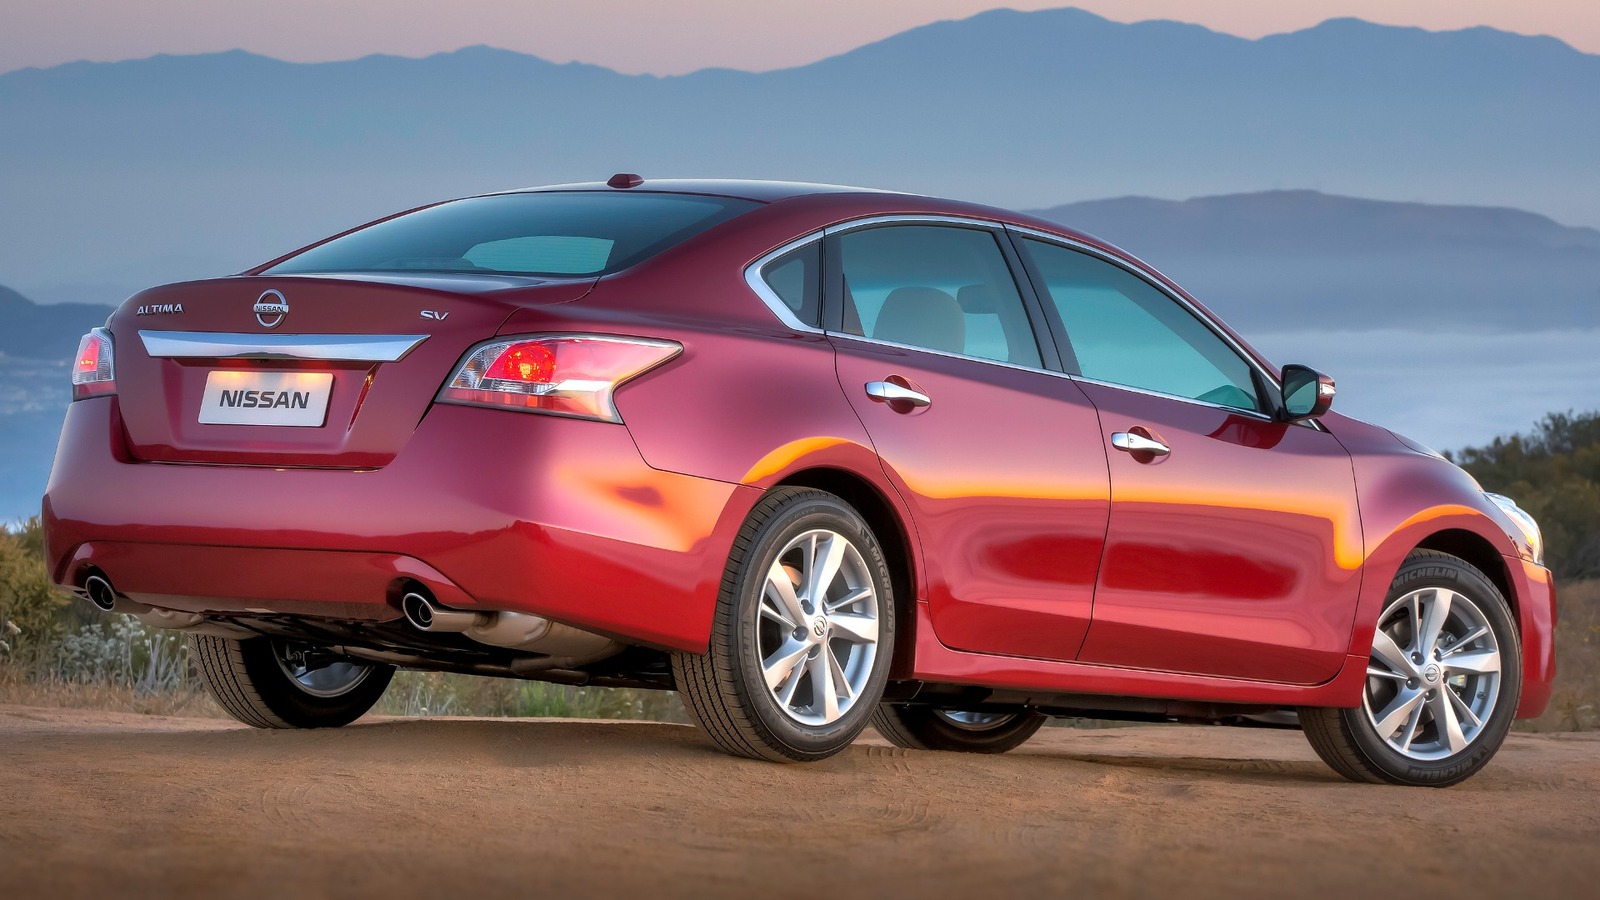 The Best Years For Nissan Altima (And Some To Avoid) – SlashGear